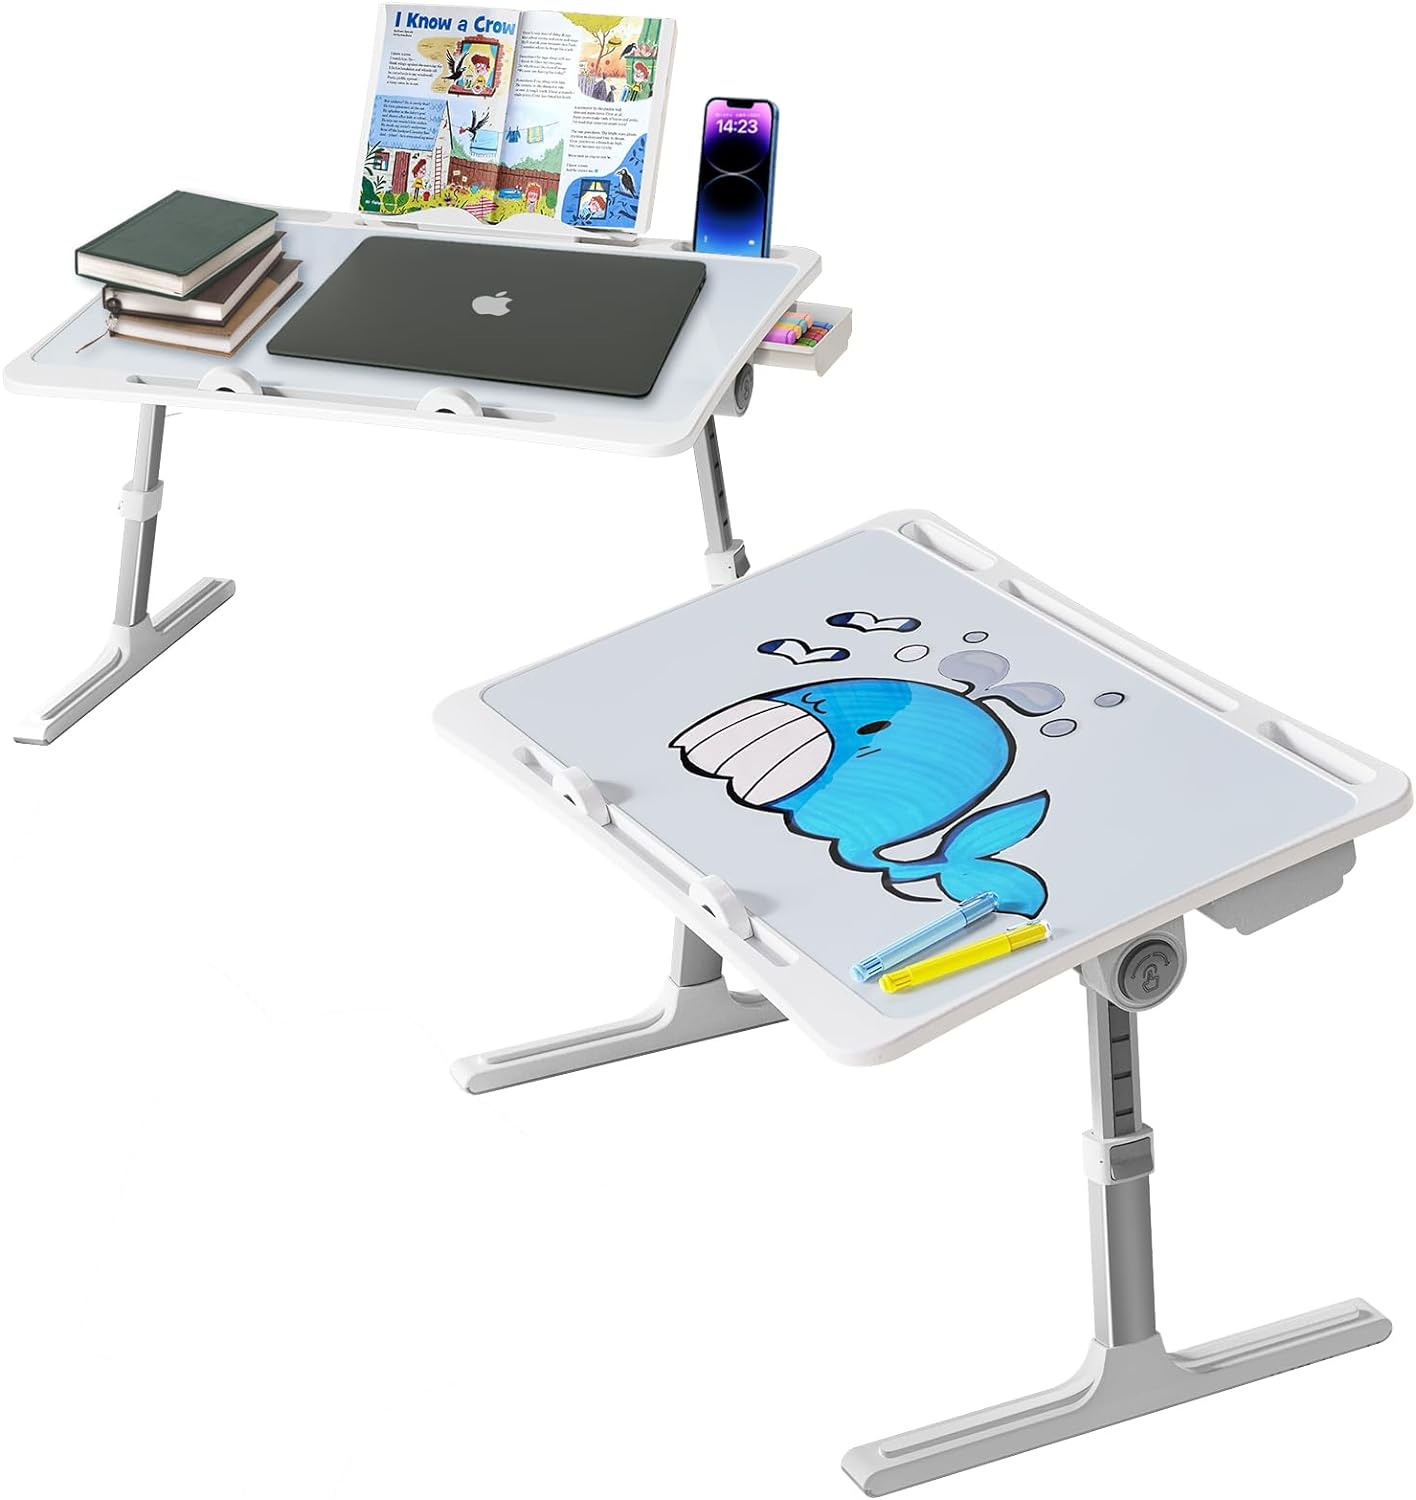 Adjustable Laptop Lap Desk for Bed - Kids Drawing Table with Storage, Dry Erase